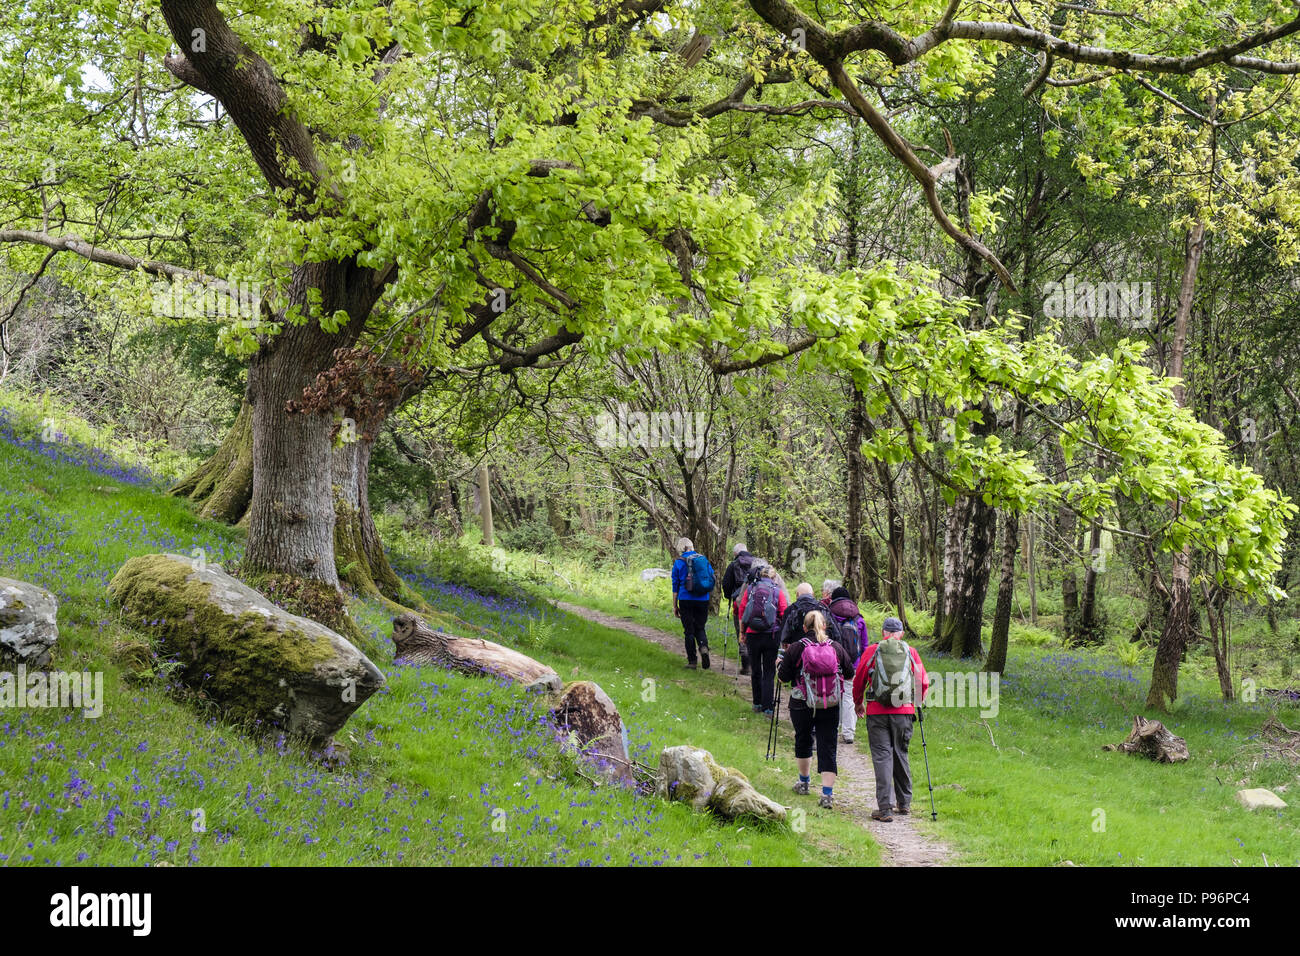 Ramblers group on a country walk hiking walking under bough of an Oak Tree in a Bluebell wood in spring. Bethesda, Gwynedd, Wales, UK, Britain Stock Photo